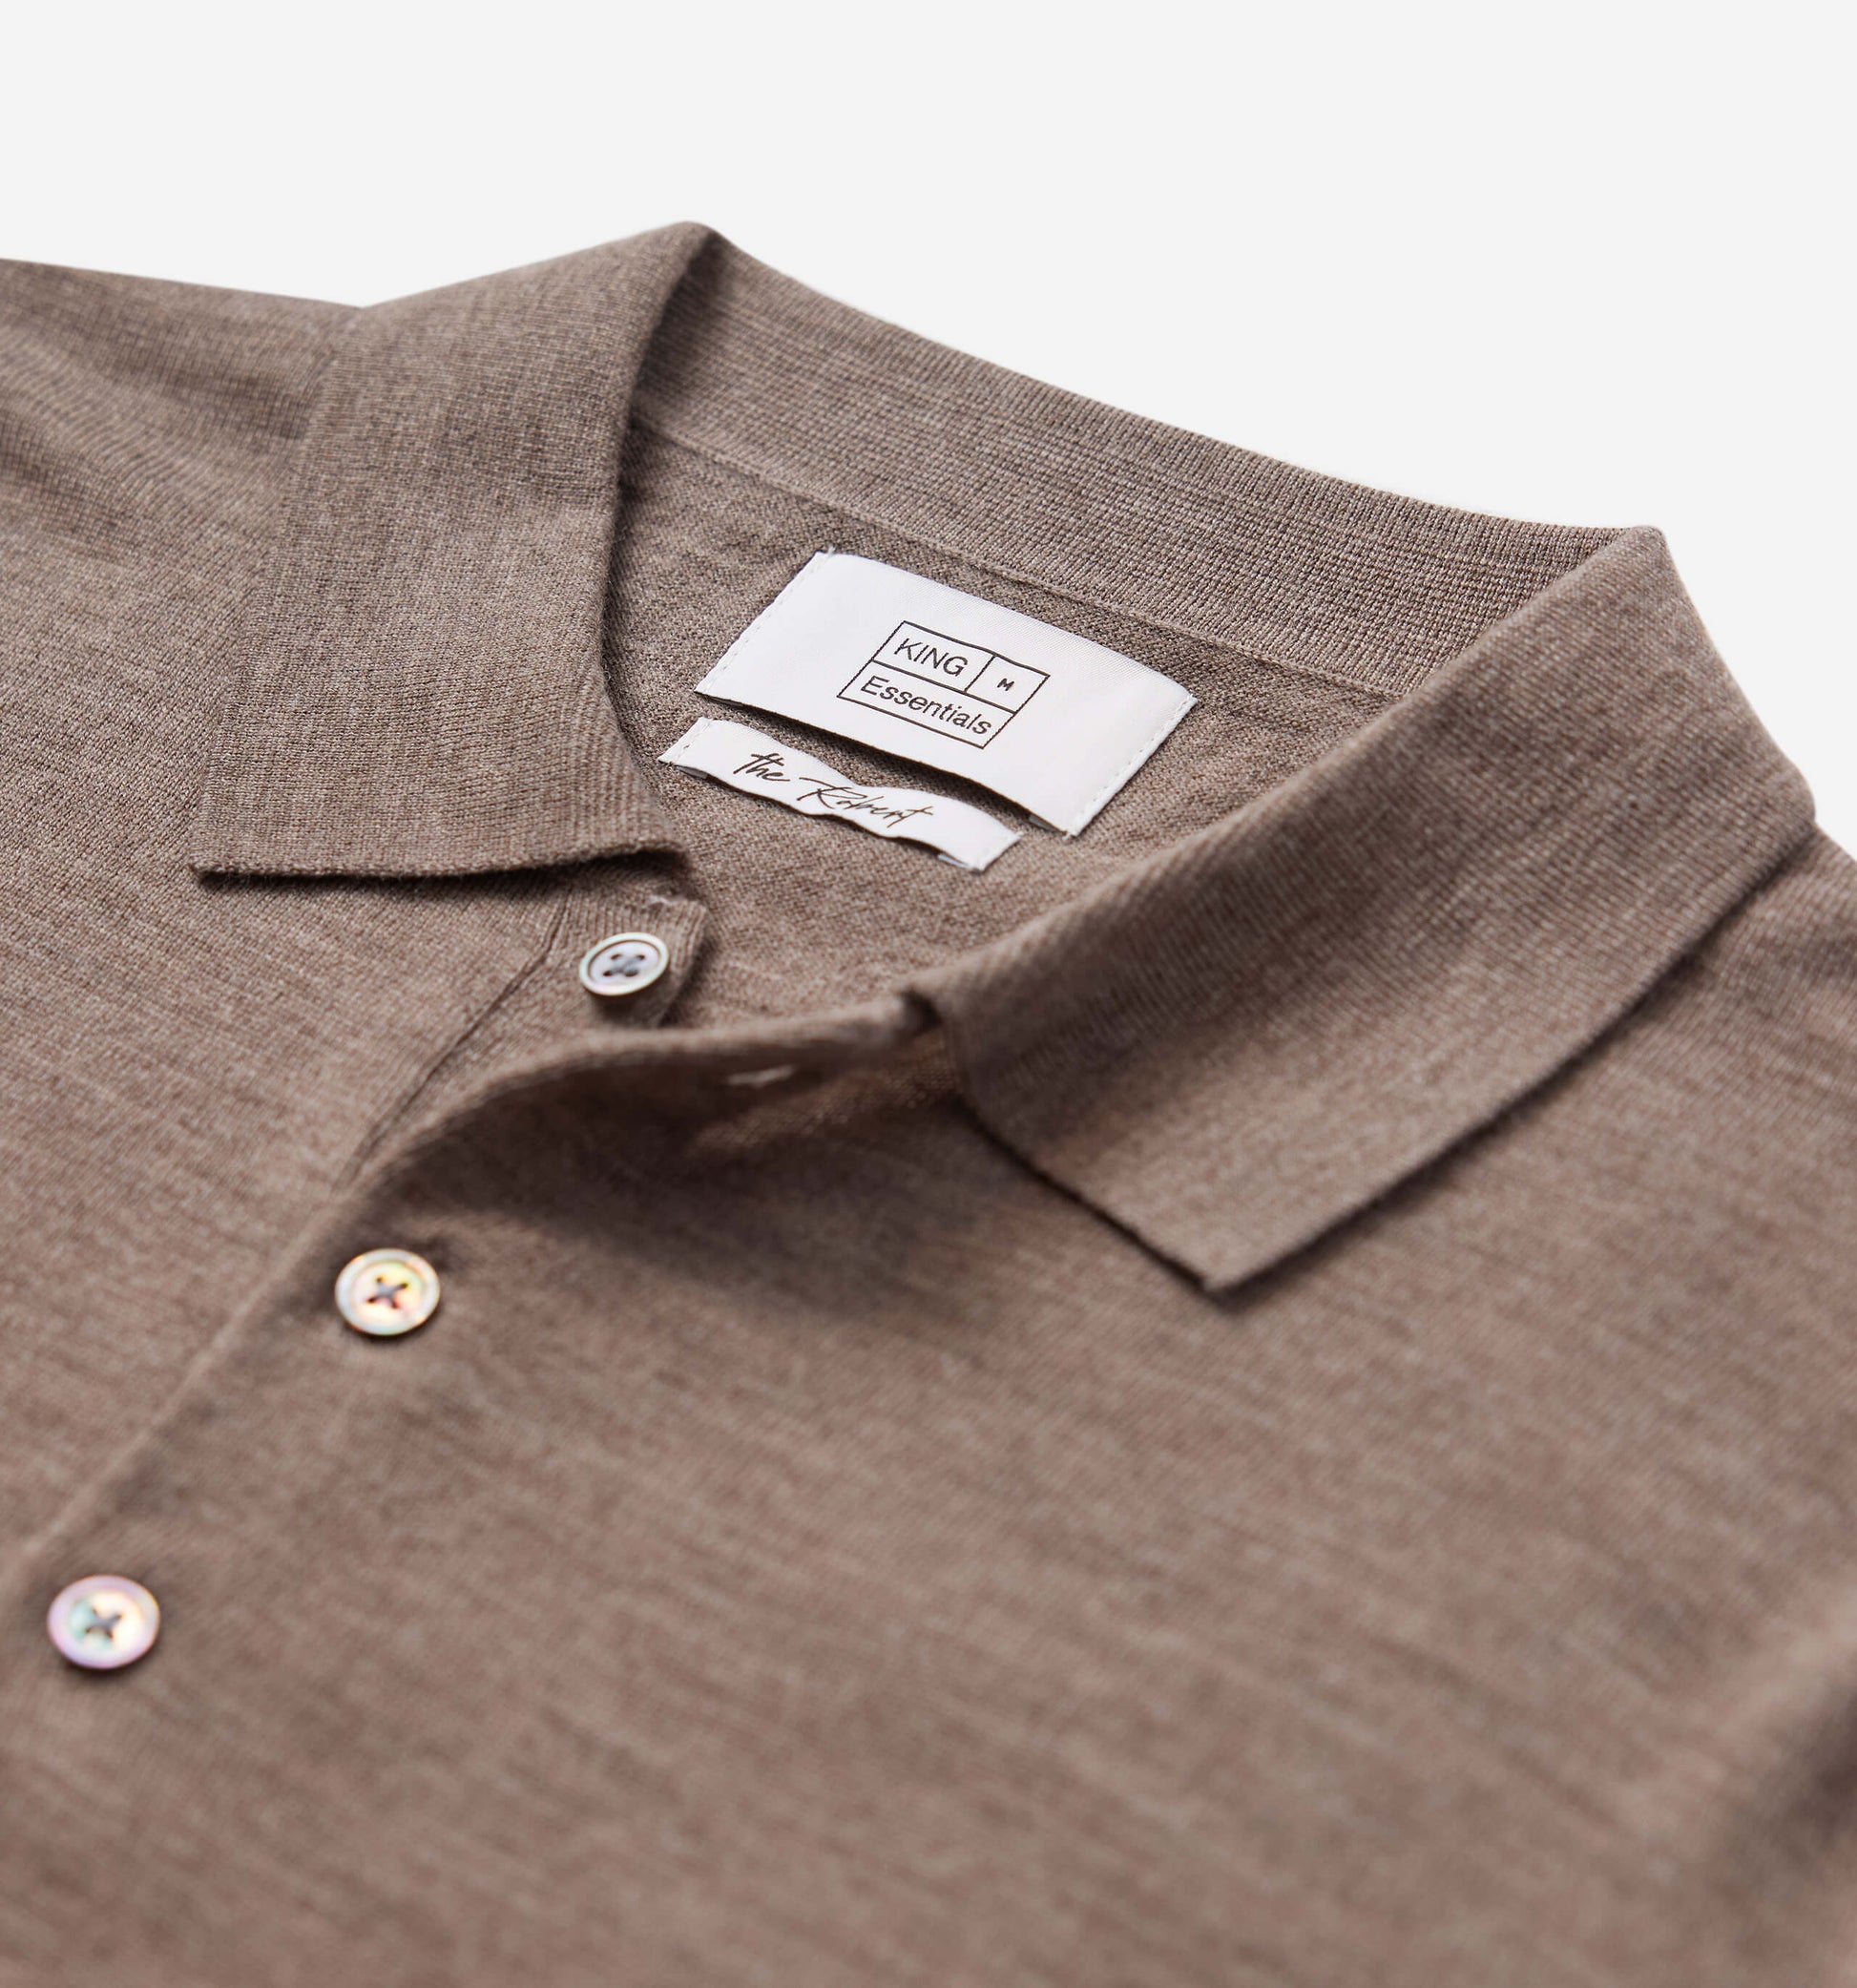 The Robert - Merino Wool Polo In Brown From King Essentials